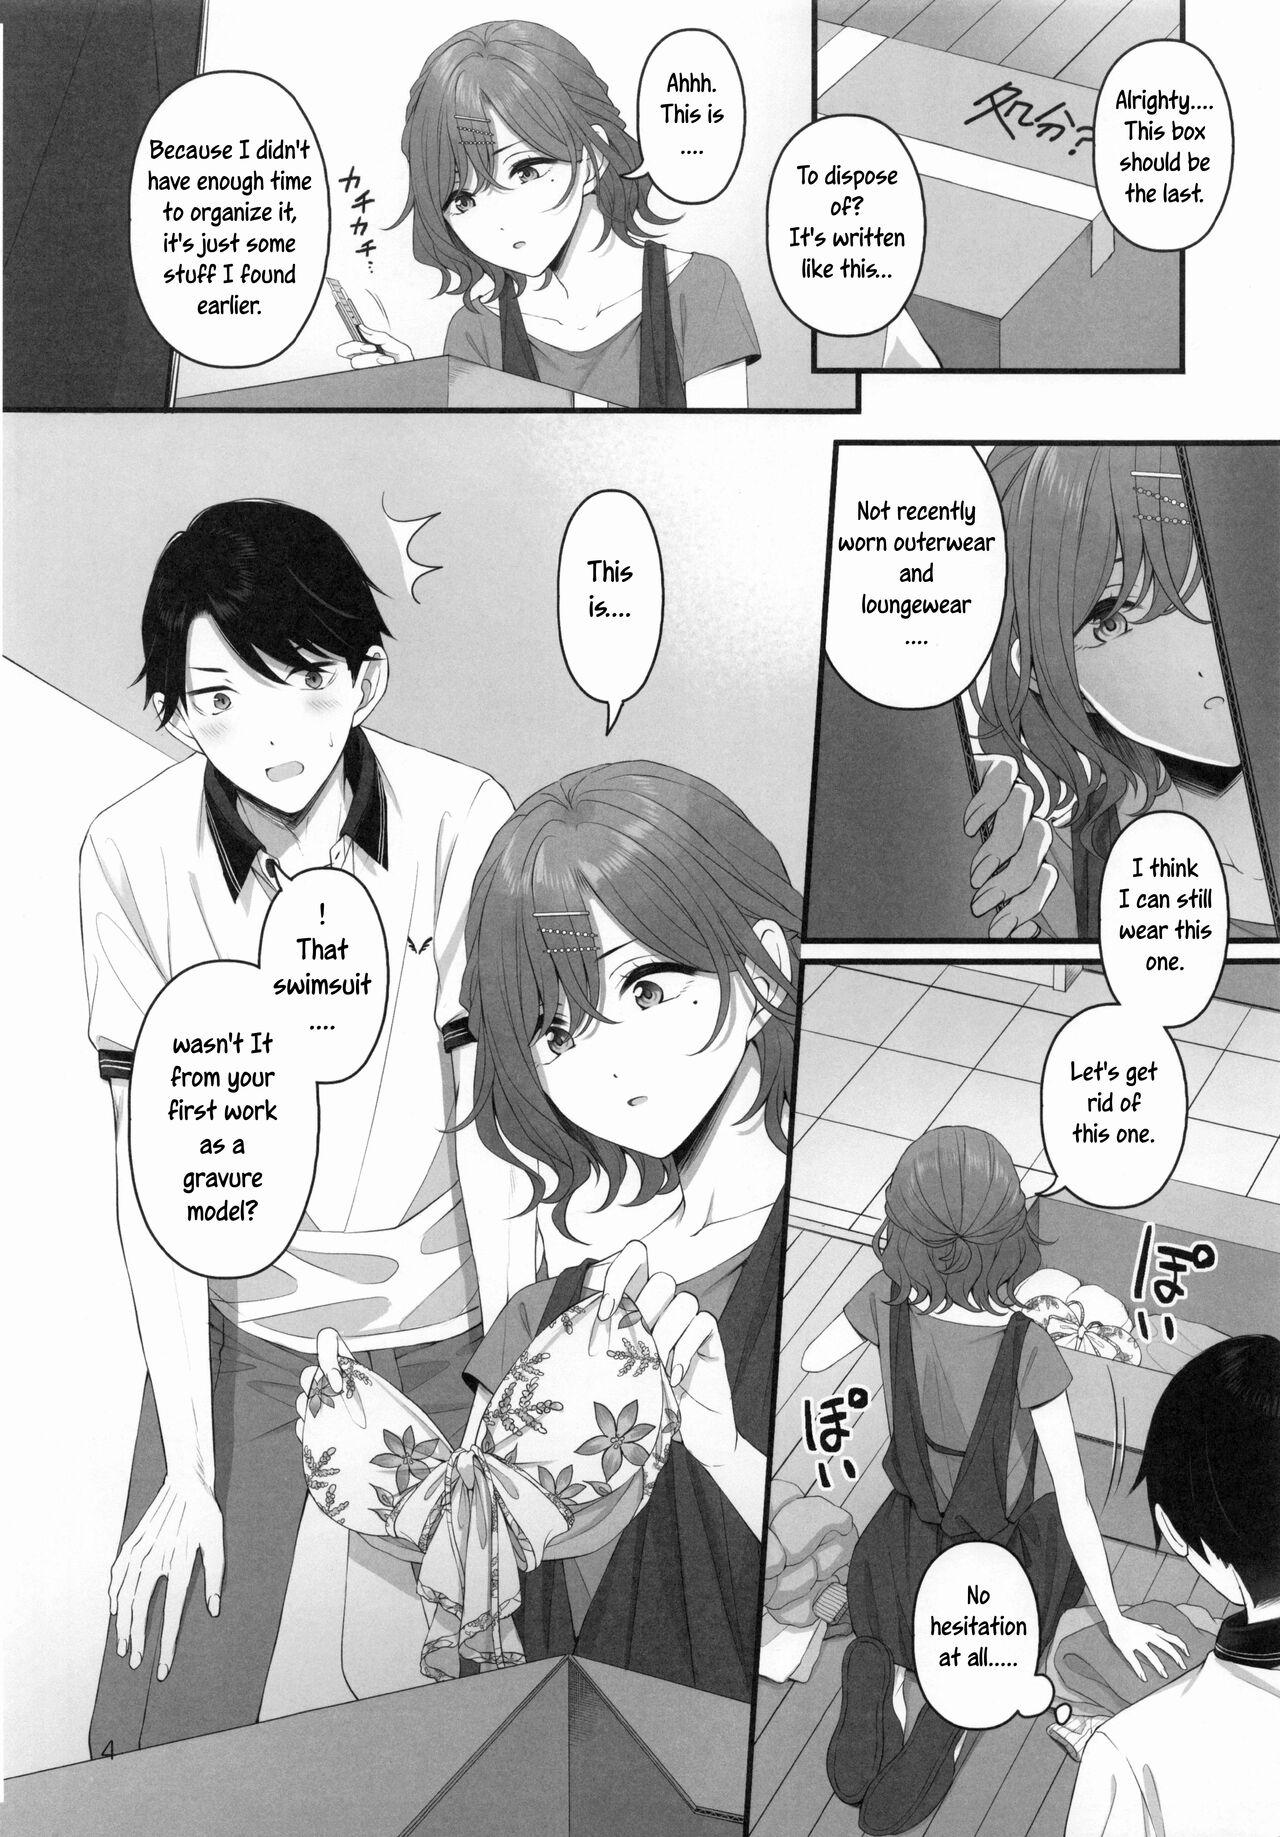 Rebolando Spit it Out! - The idolmaster Negao - Page 4